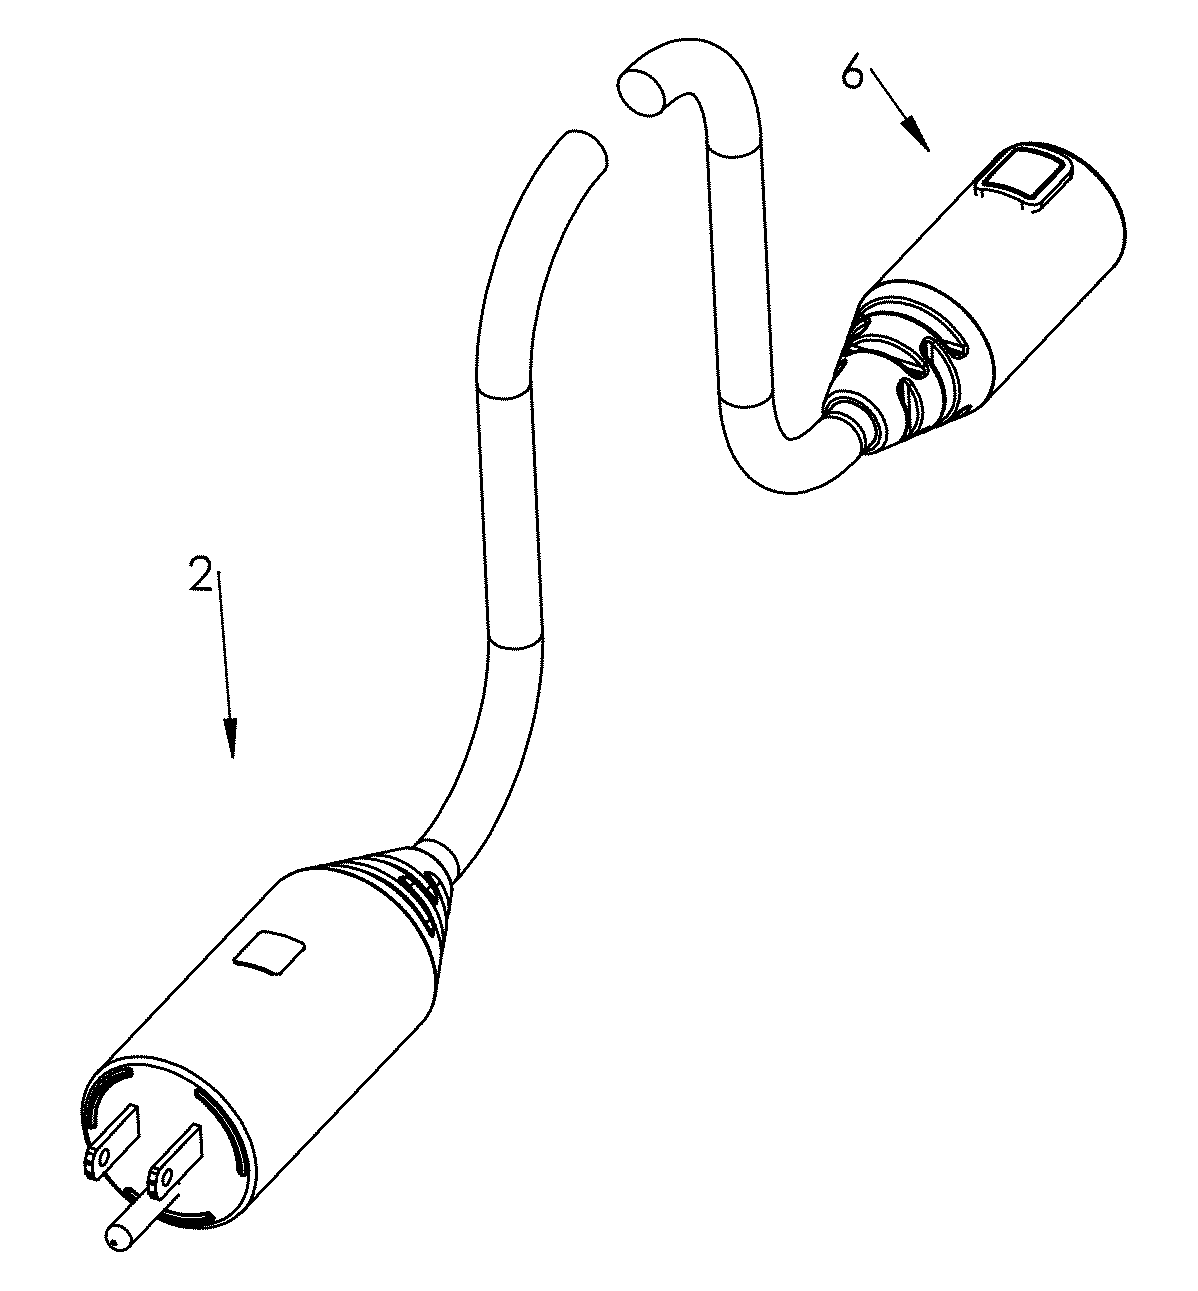 Electrical cord plug eject mechanism